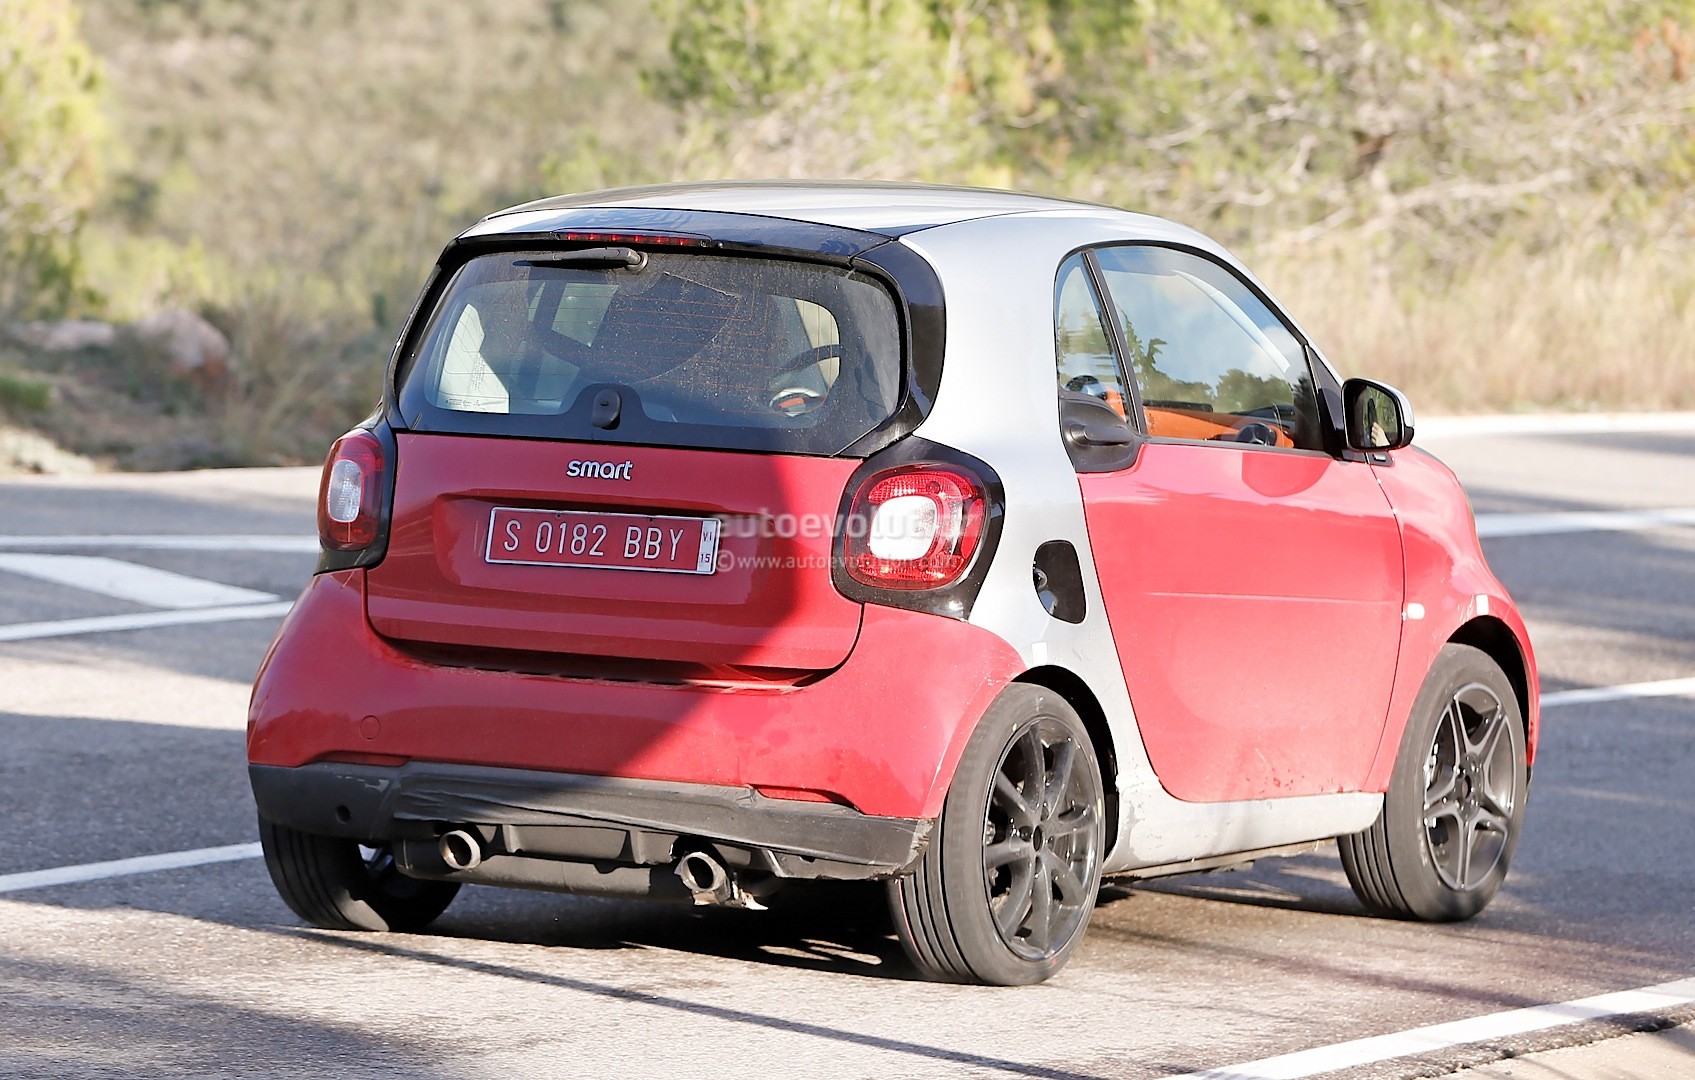 2015 Smart Fortwo Brabus Shows Details: Geneva Debut Likely - autoevolution